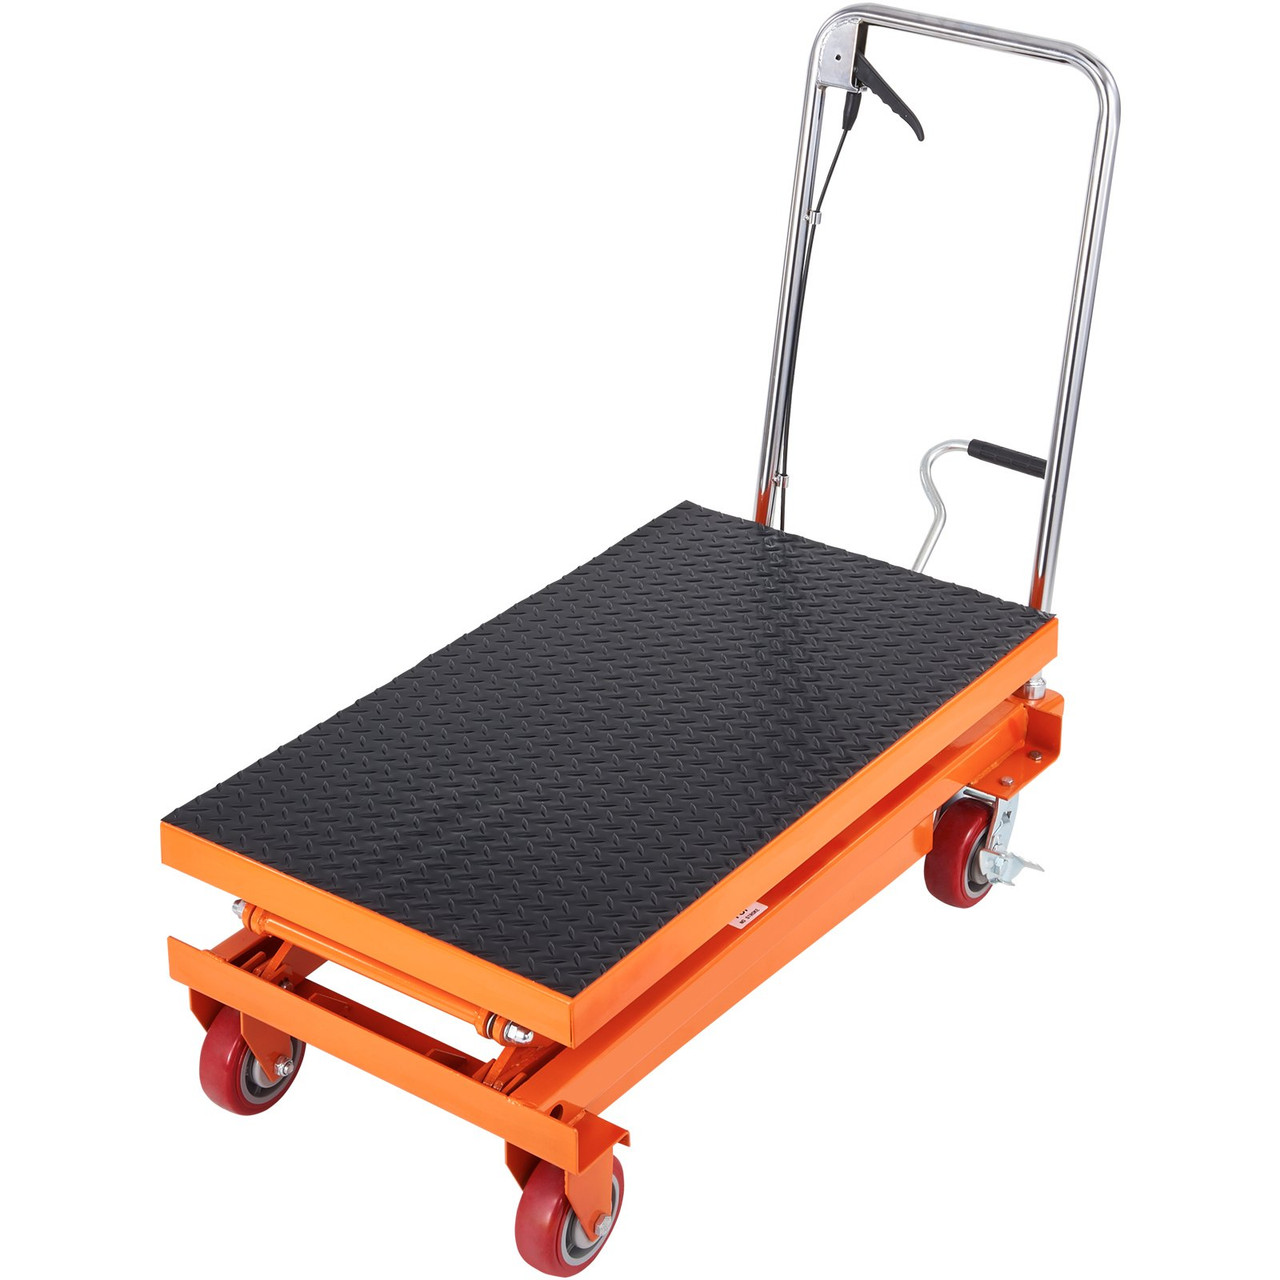 VEVOR Hydraulic Lift Table Cart, 770lbs Capacity 59" Lifting Height, Manual Double Scissor Lift Table with 4 Wheels and Non-slip Pad, Hydraulic Scissor Cart for Material Handling and Transportation